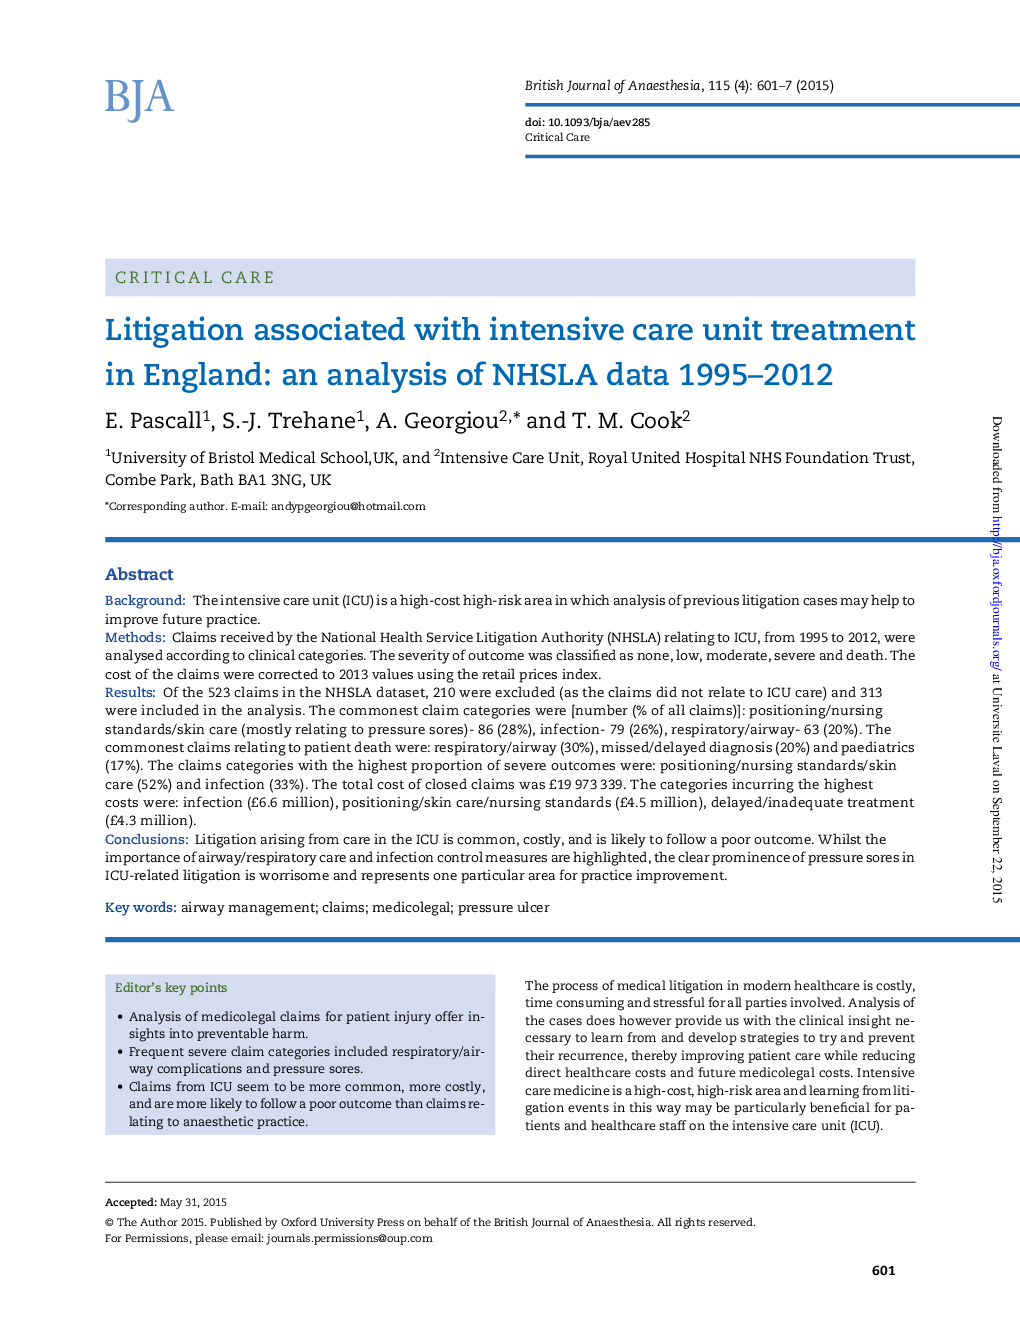 Litigation associated with intensive care unit treatment in England: an analysis of NHSLA data 1995-2012